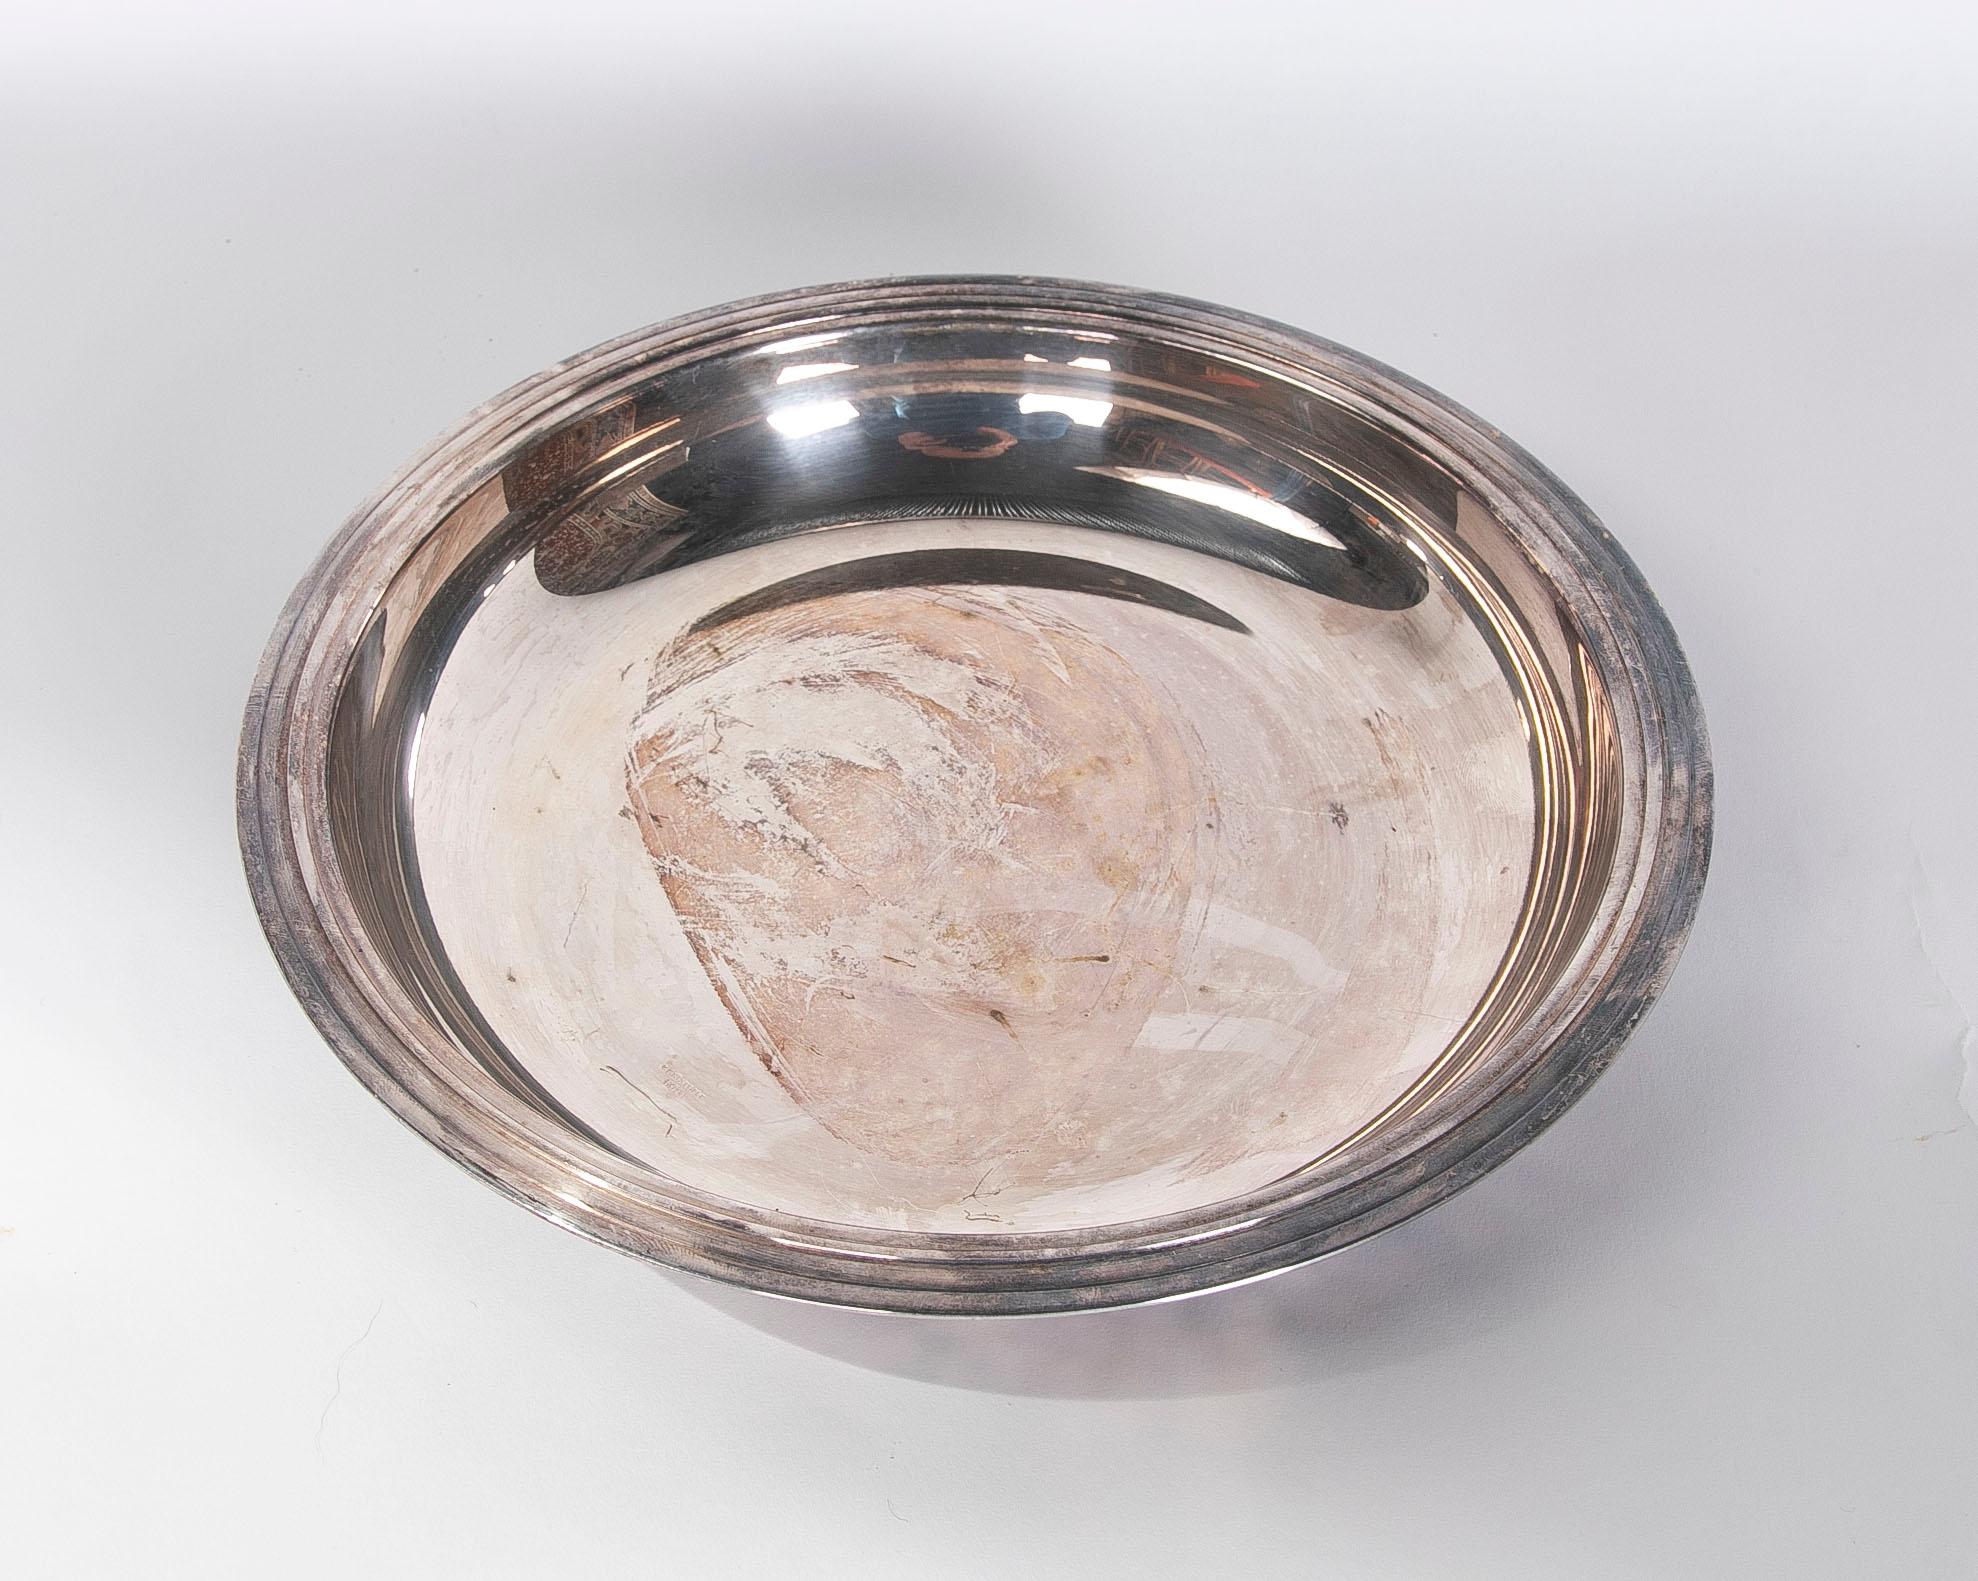 1980s round silver-plated metal tray.